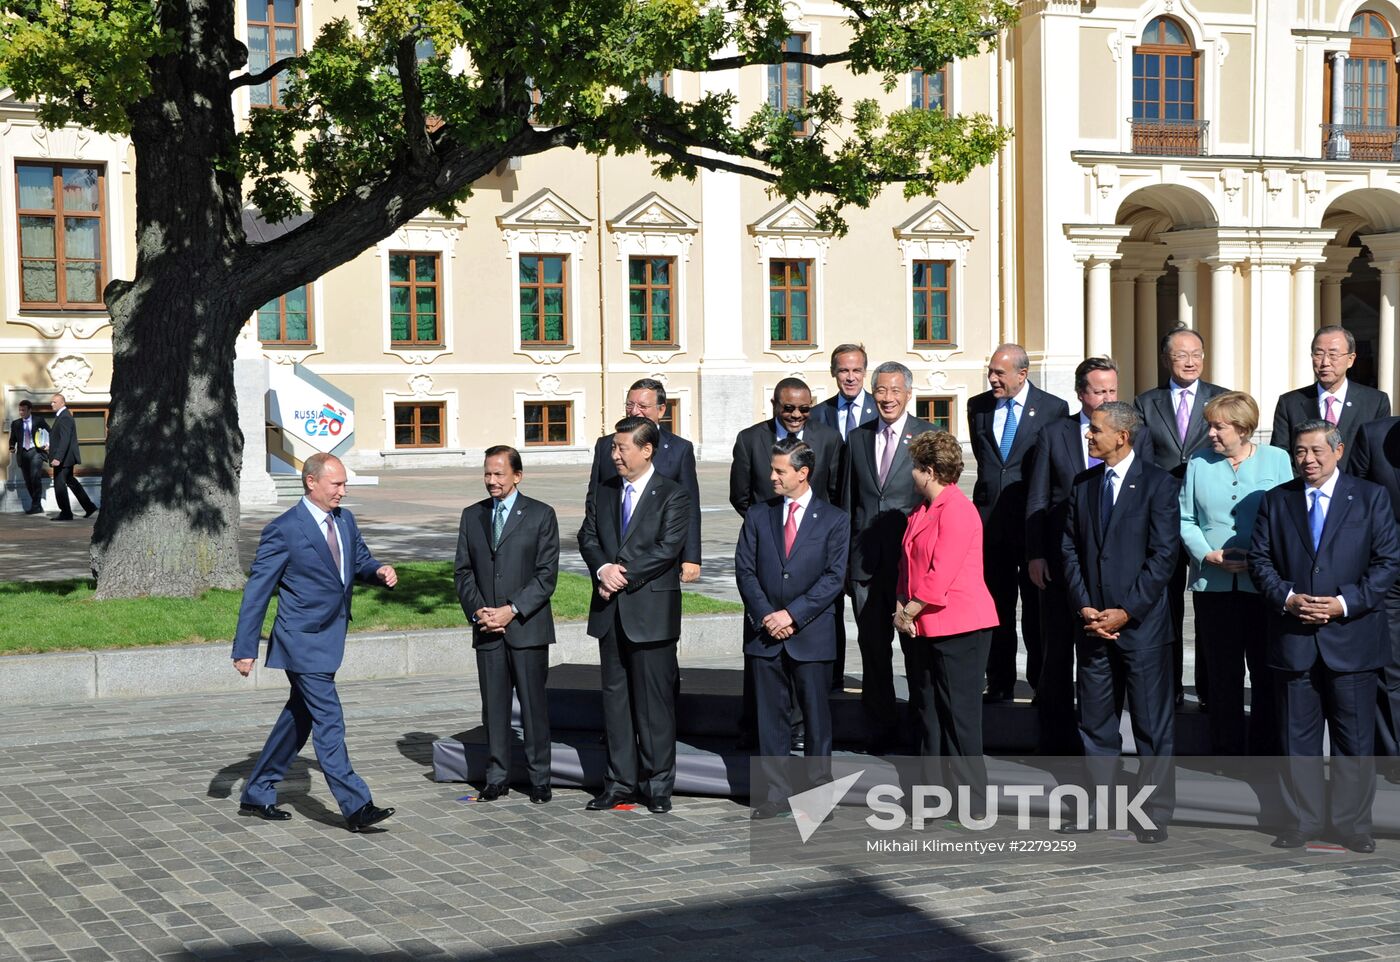 Family photo of G20 Summit participants